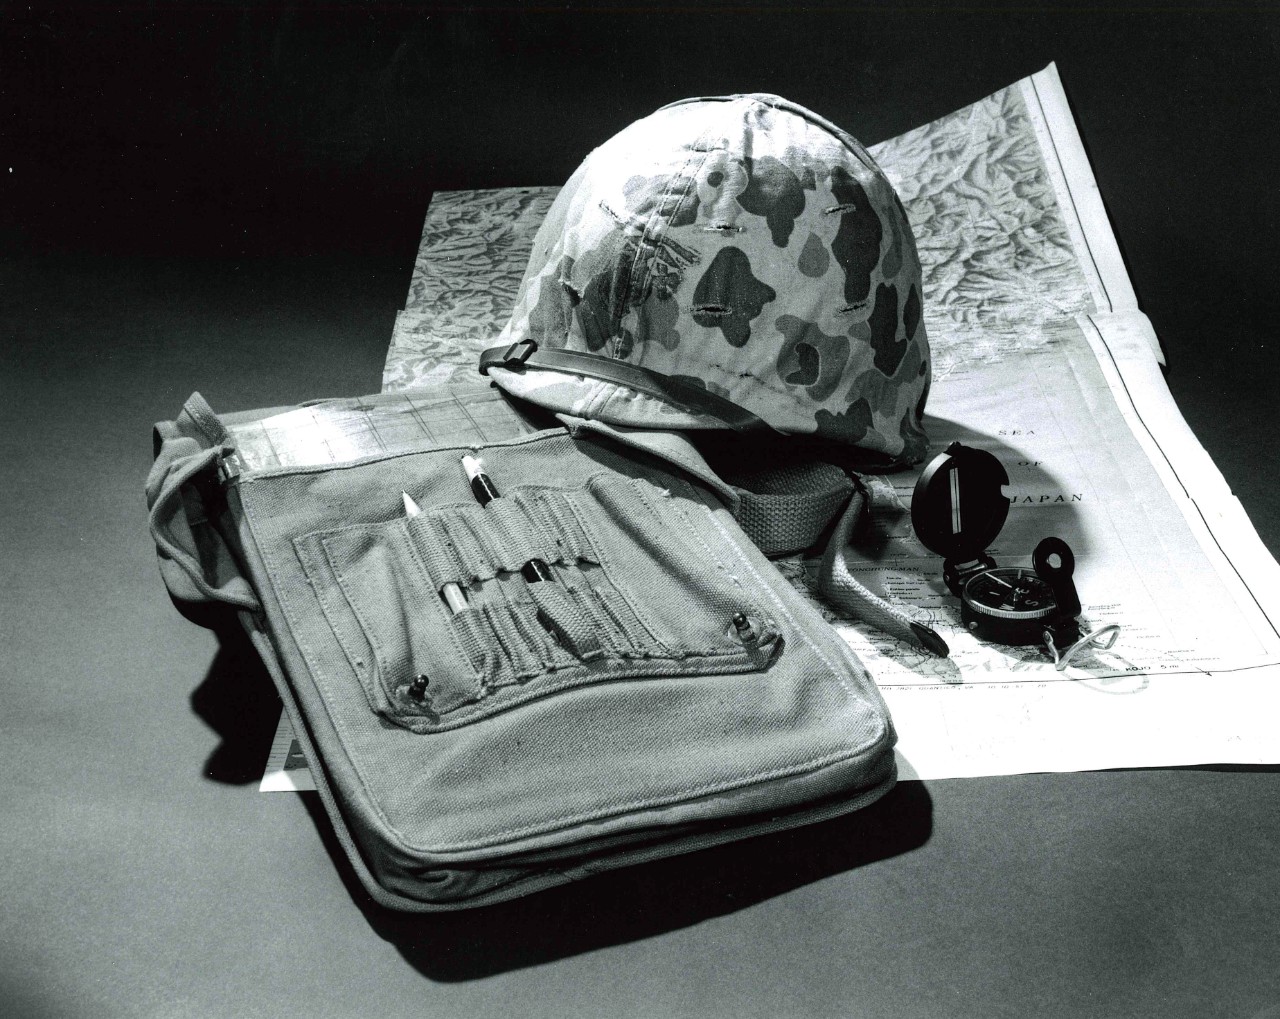 NMUSN-2849: Helmet, bag, and map of Japan, 1970s. Artifacts were in the Navigation Exhibit area. National Museum of the U.S. Navy Photograph Collection.